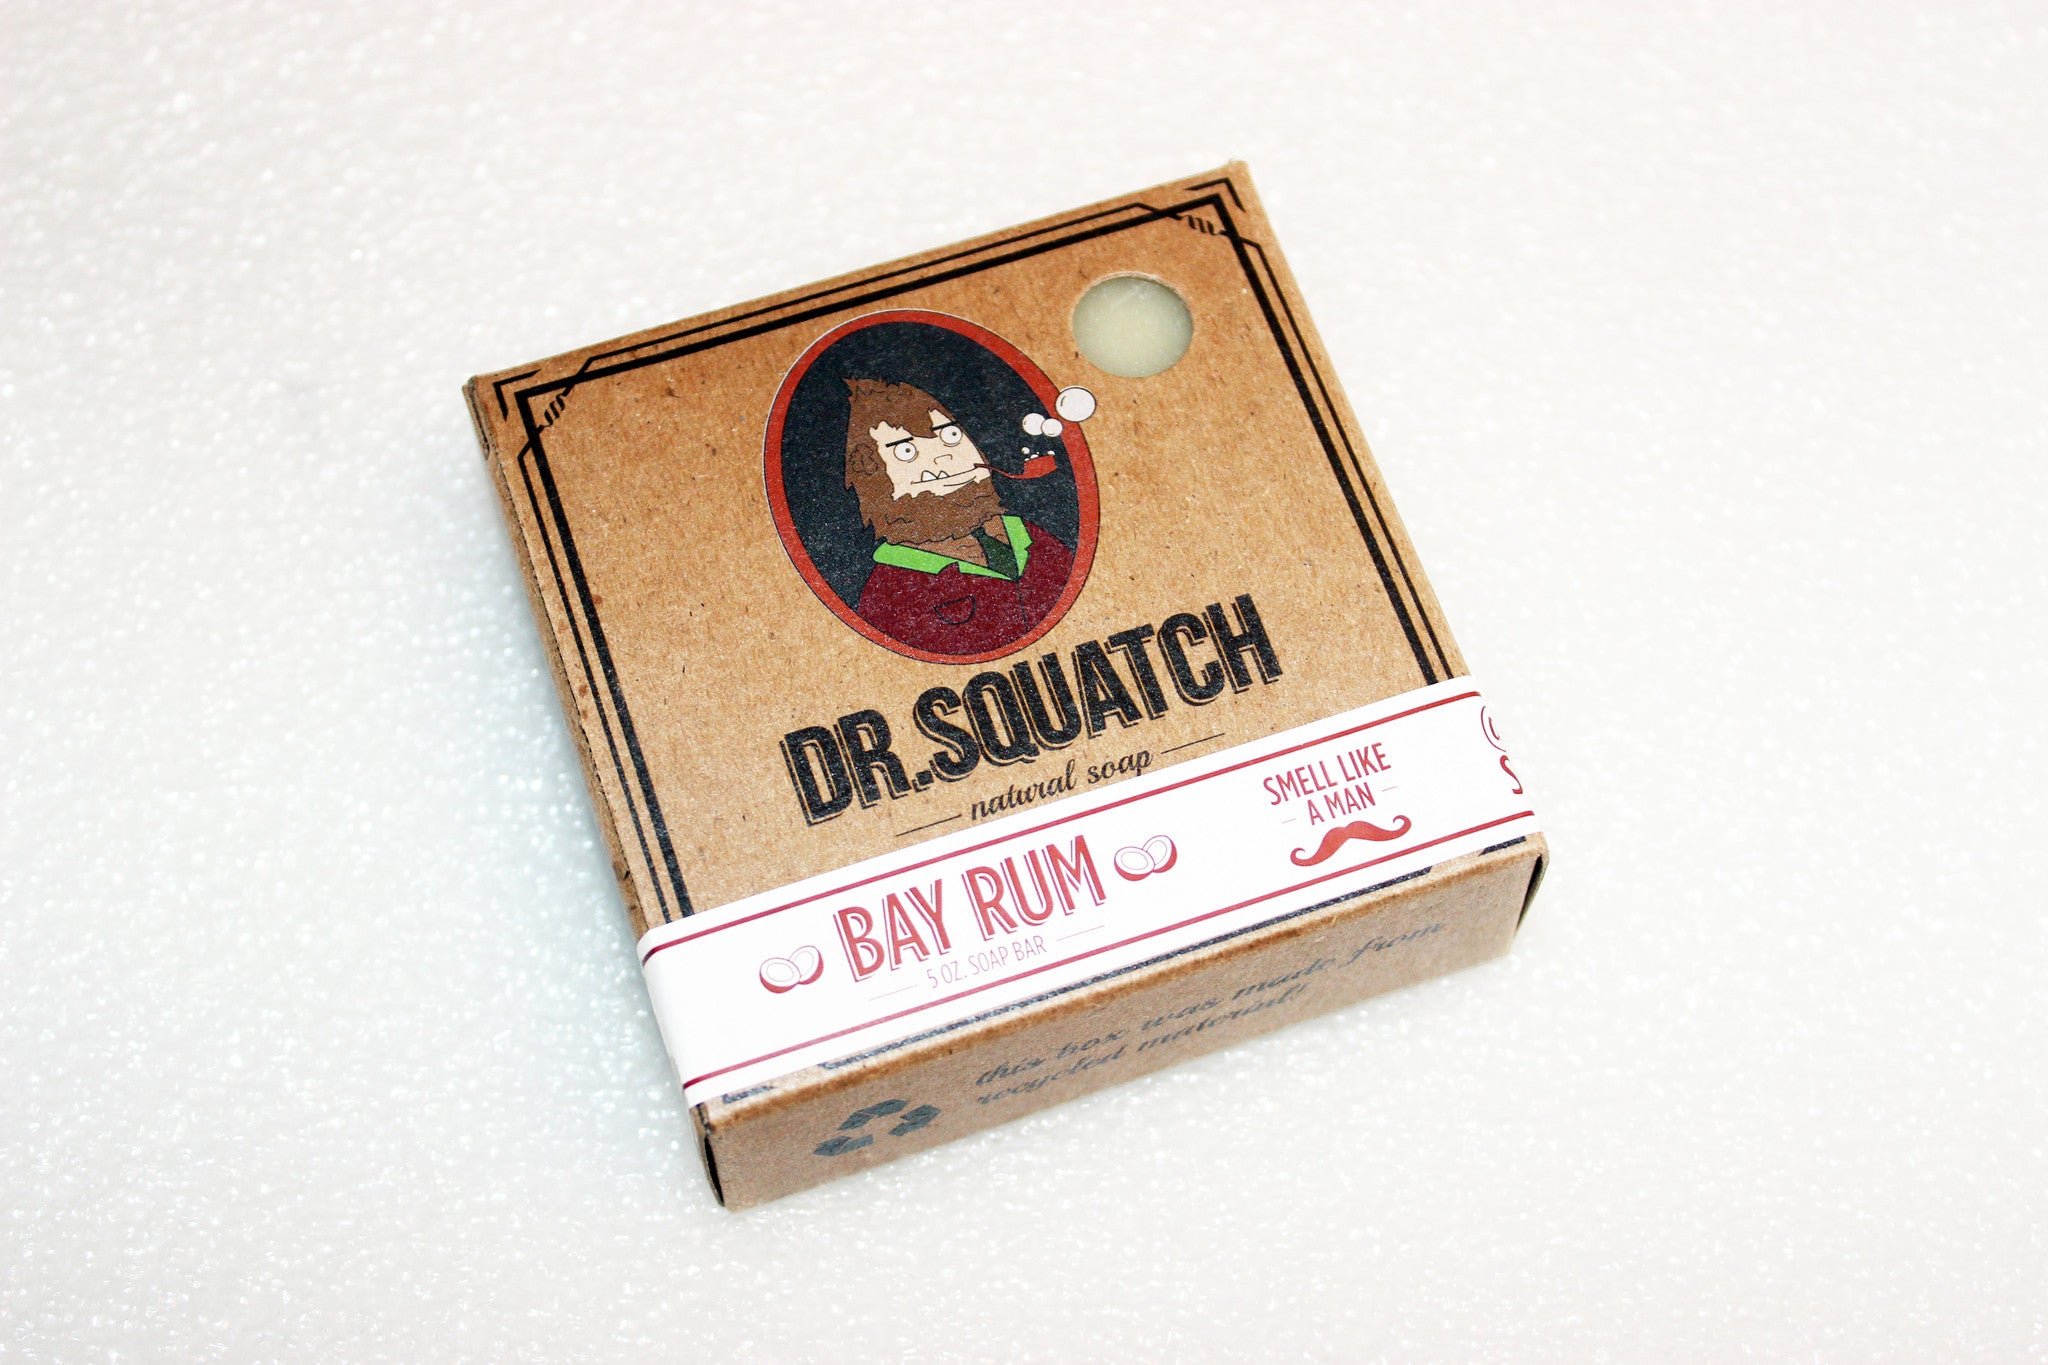 Dr. Squatch Bay Rum Soap packaging